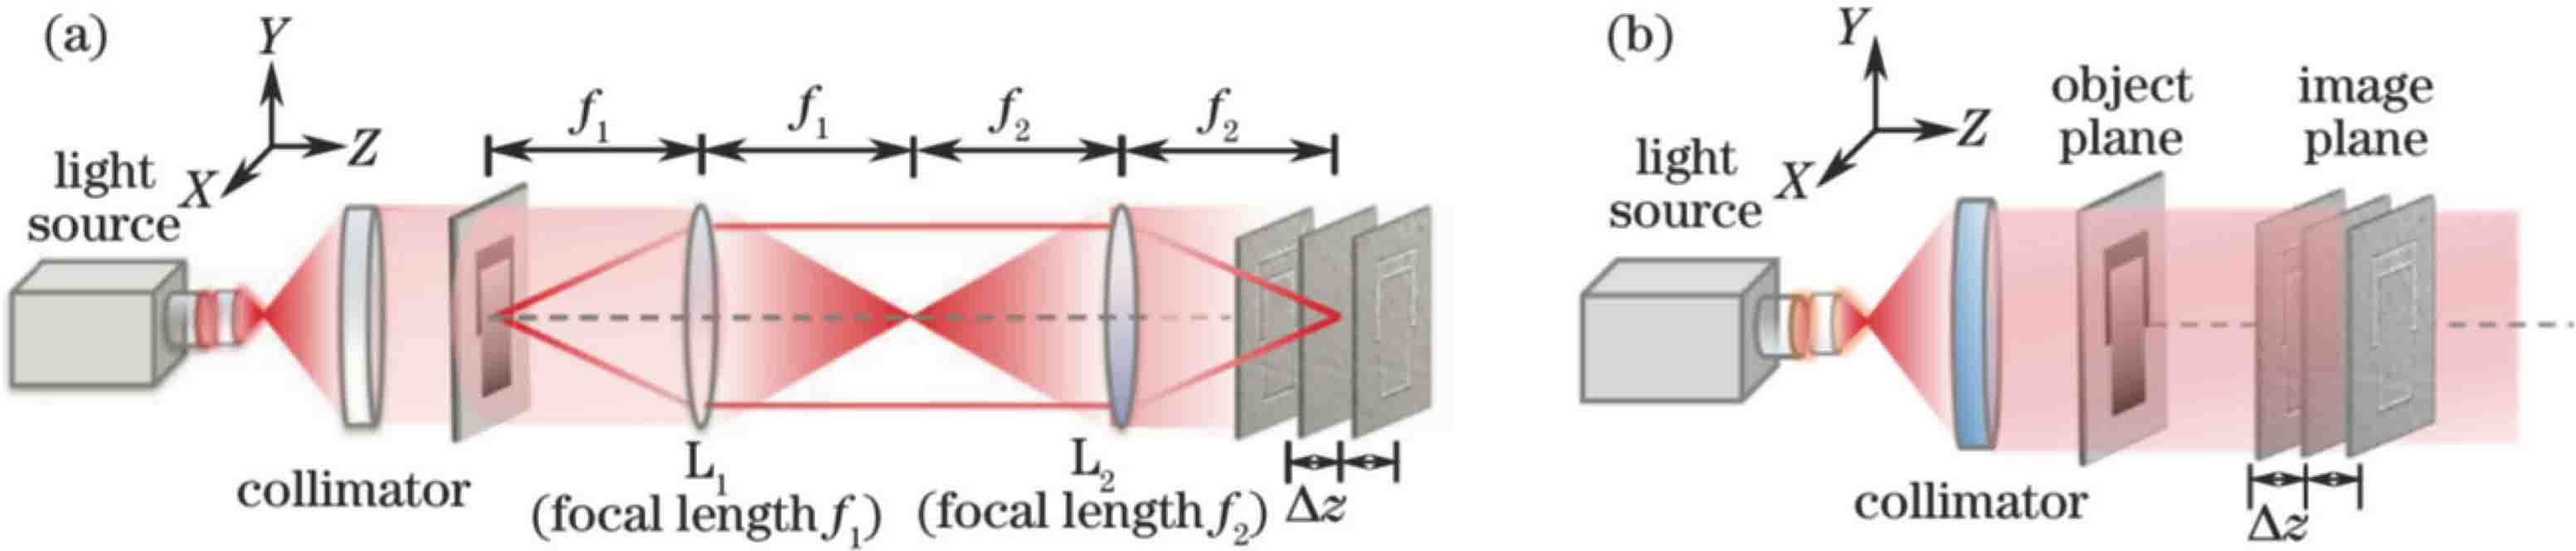 Schemes for transport of intensity equation phase imaging[9].(a) 4f system-based system; (b) lens-less system